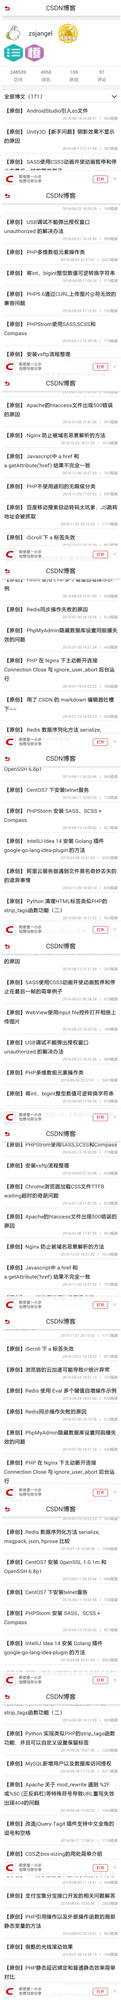 Android WebView实现网页滚动截图